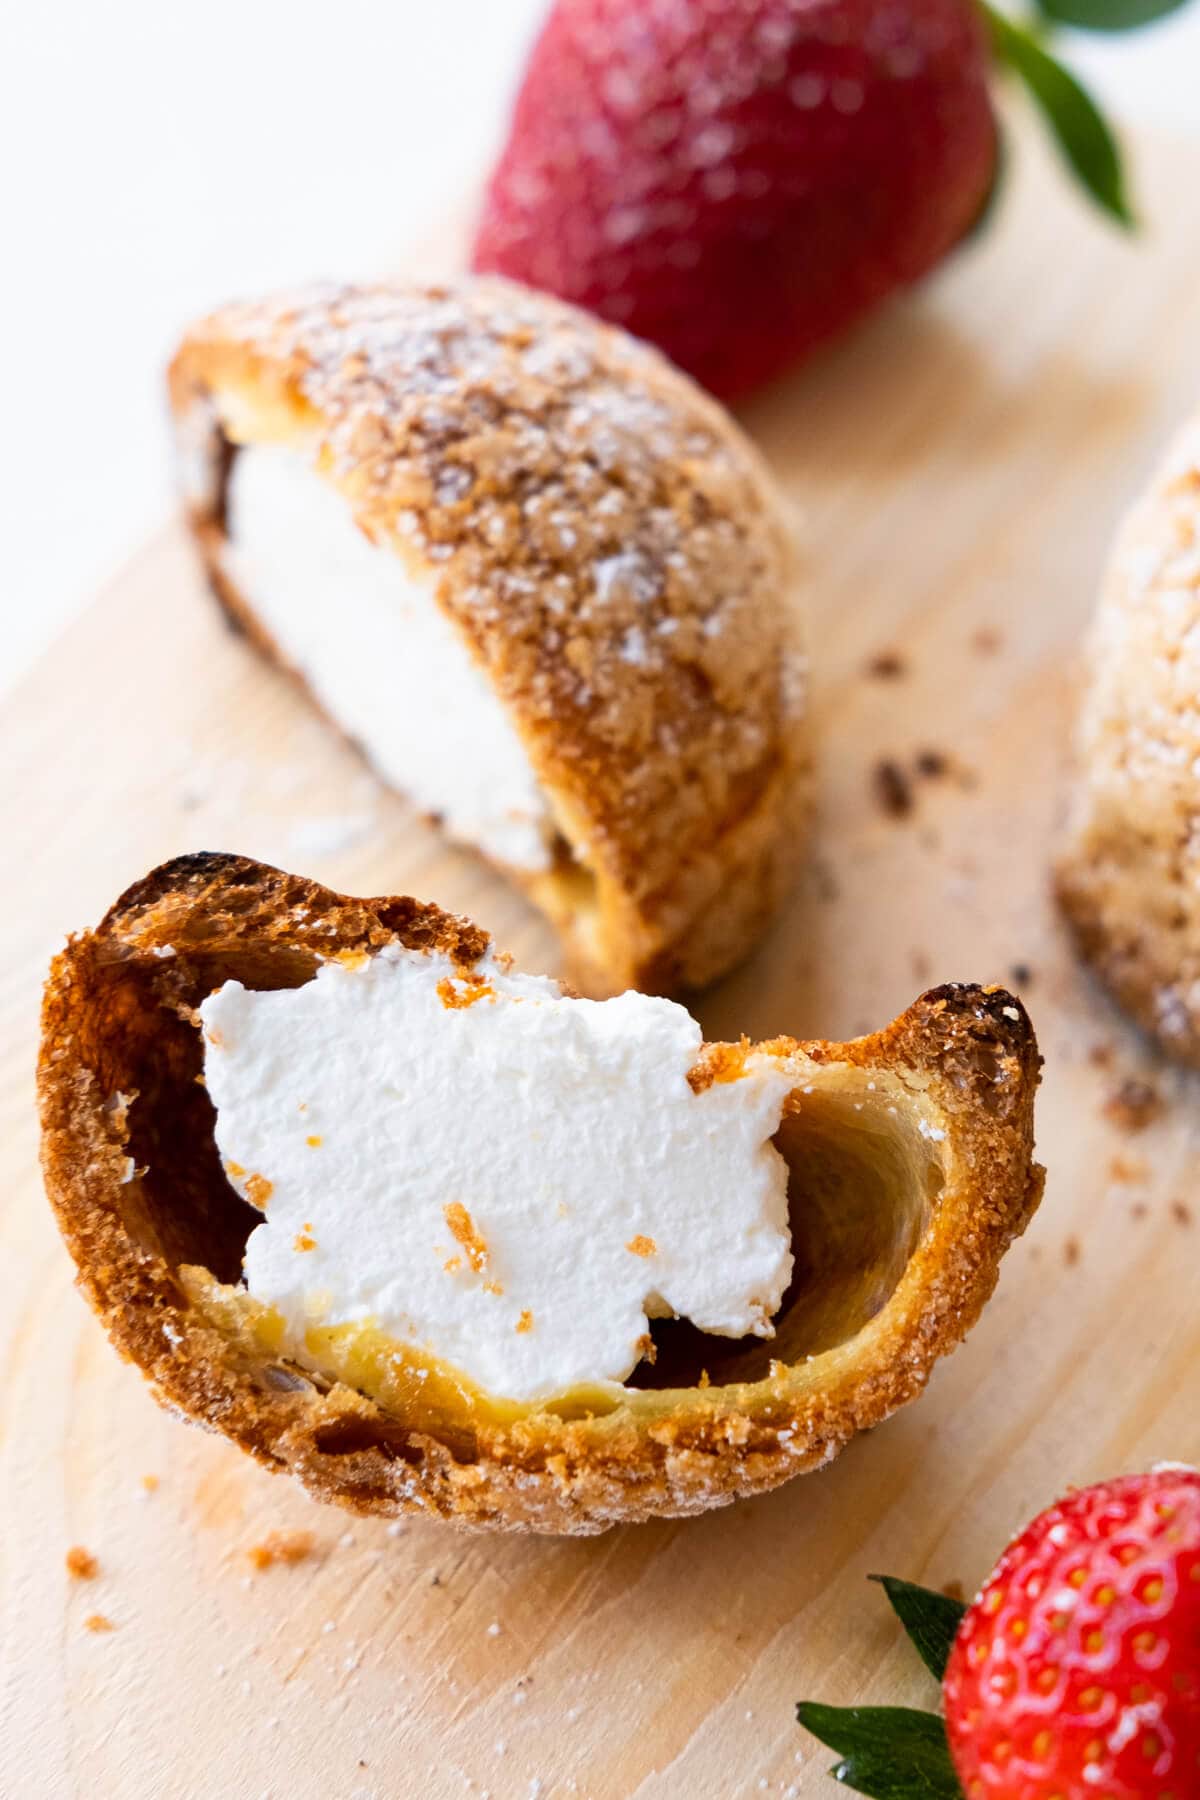 Golden brown crispy Choux pastry cutted in half showing its fresh fluffy whipped cream in the center. 